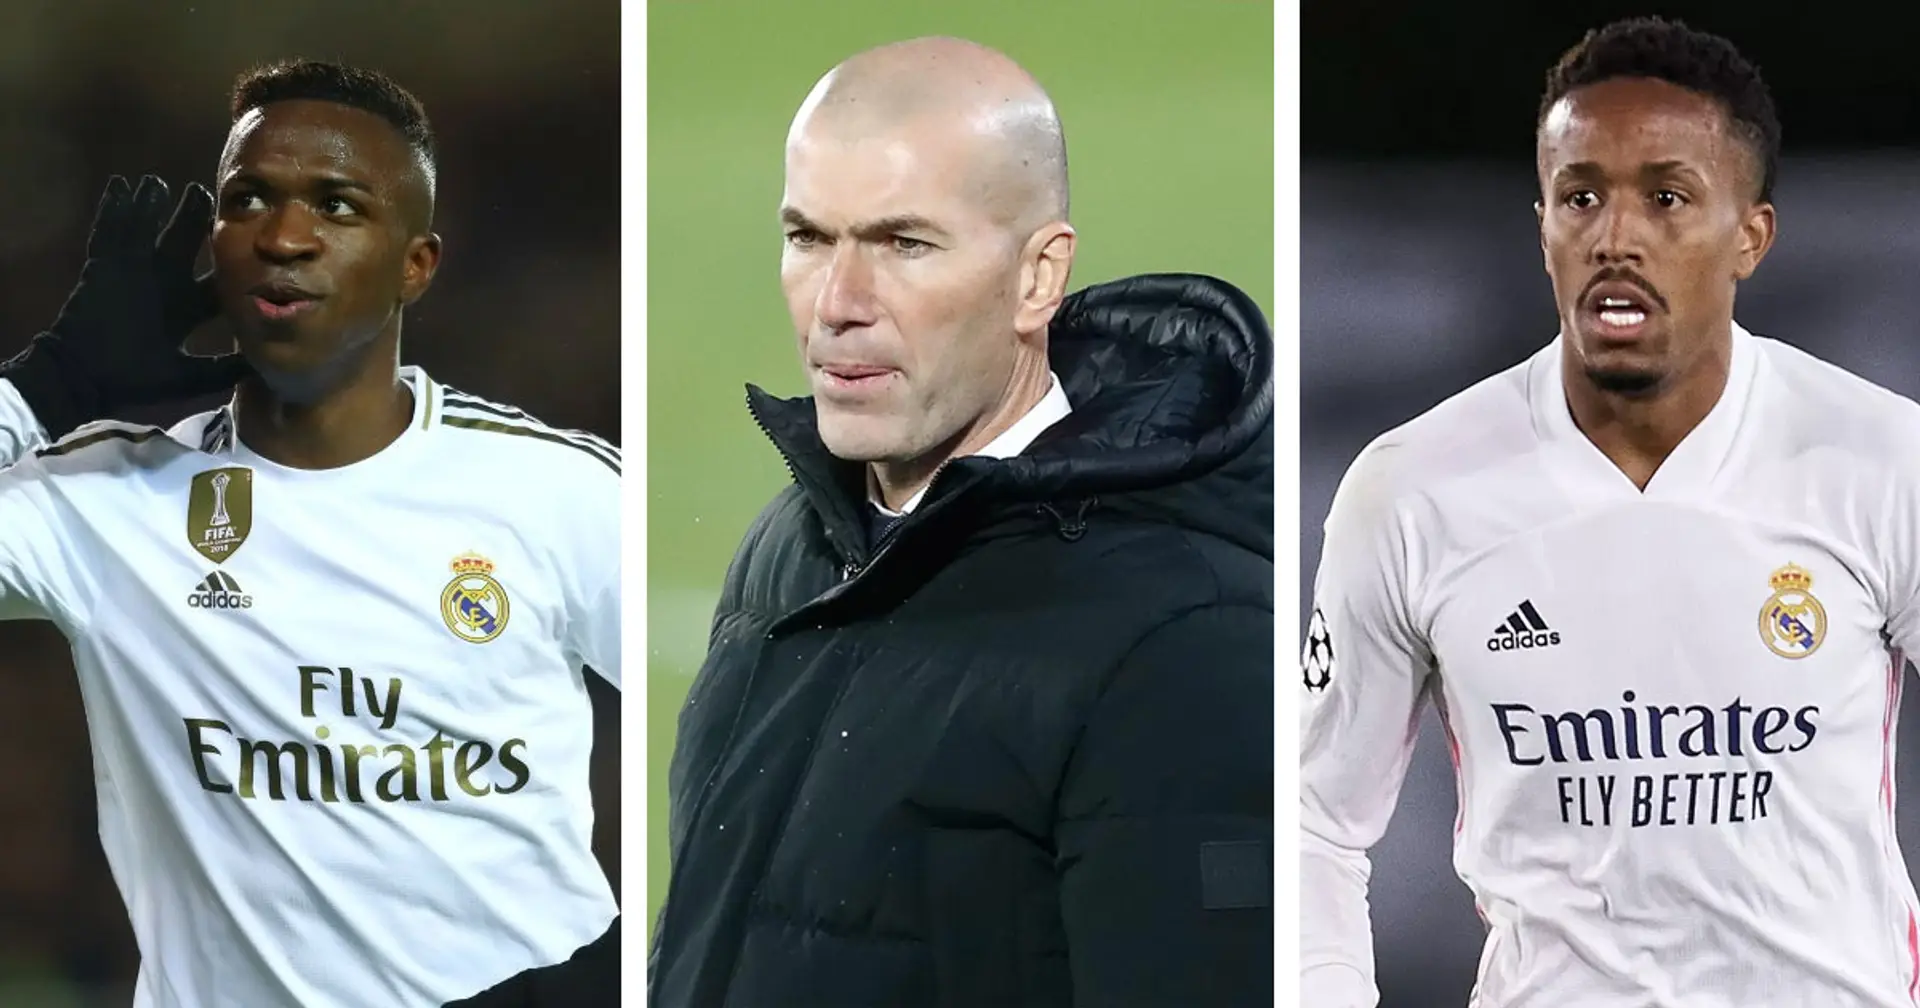 'Starting to think Zidane isn't the problem': 2 Madrid fans disappointed with club's youngsters after Levante loss